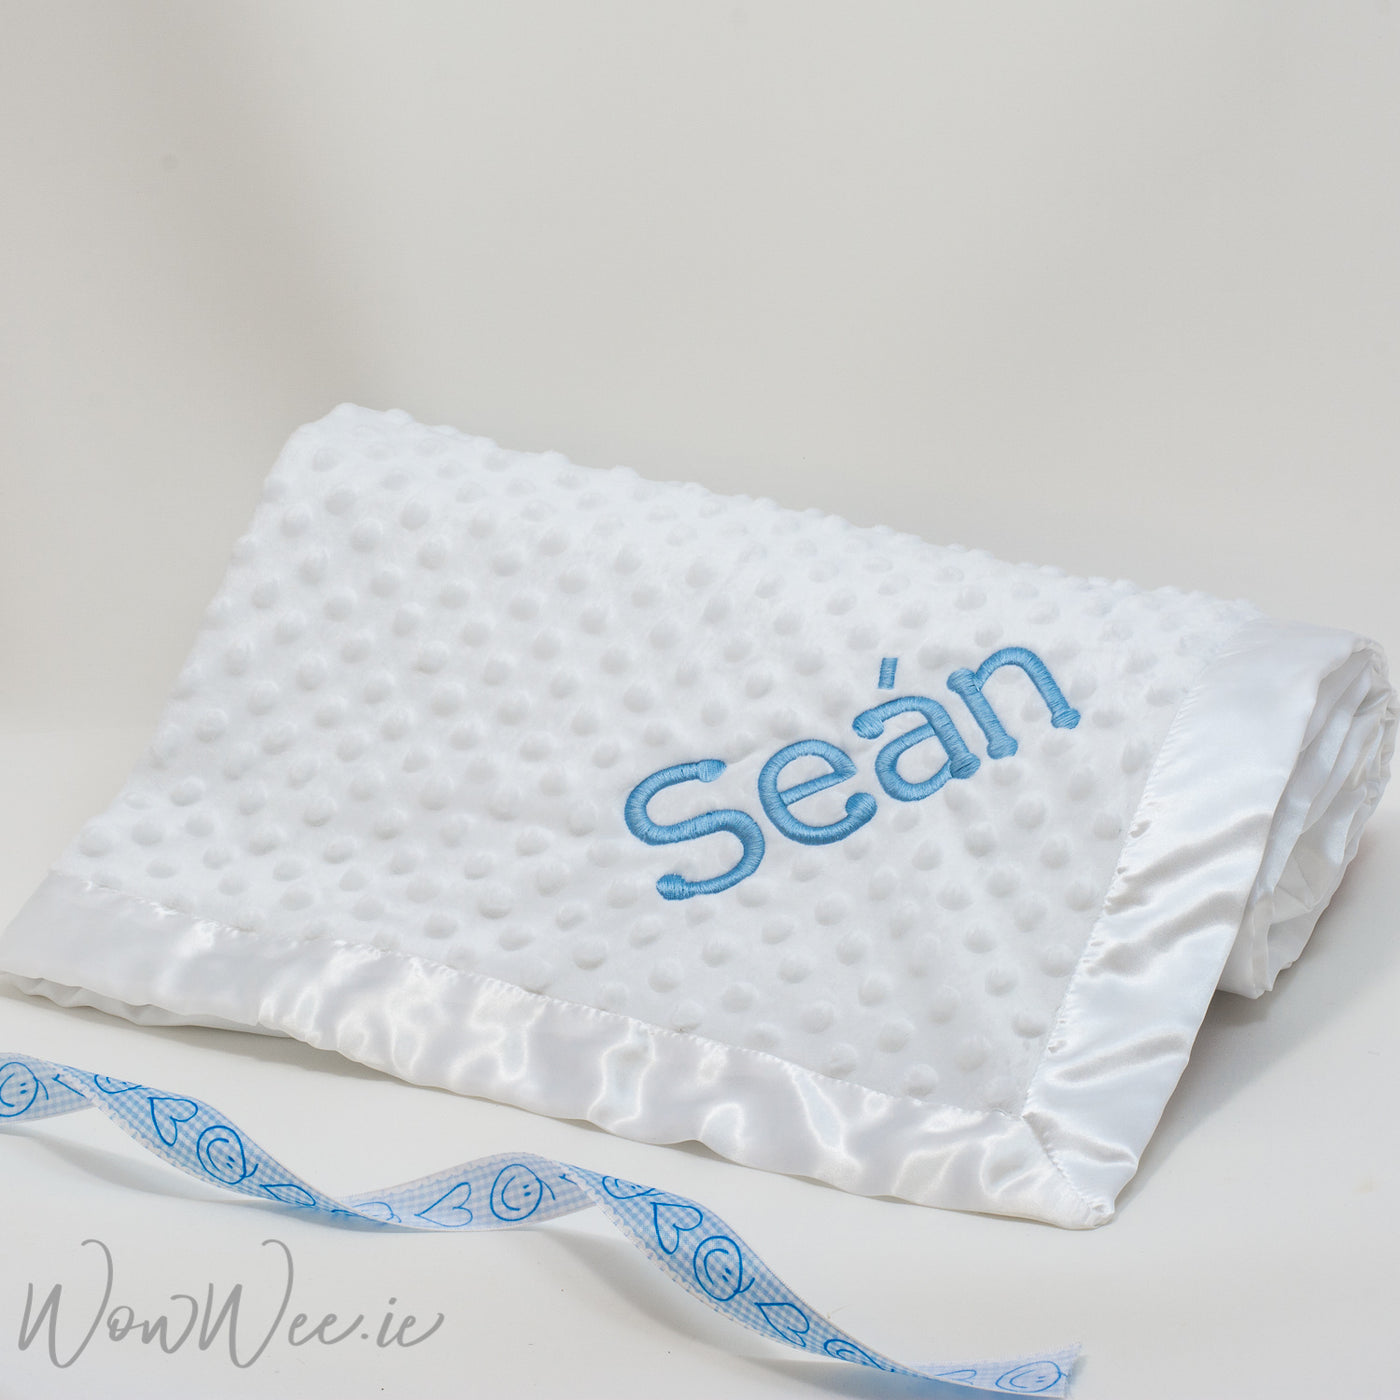 Personalised Baby Blanket for Boys - White Bubble - WowWee.ie Personalised Gifts